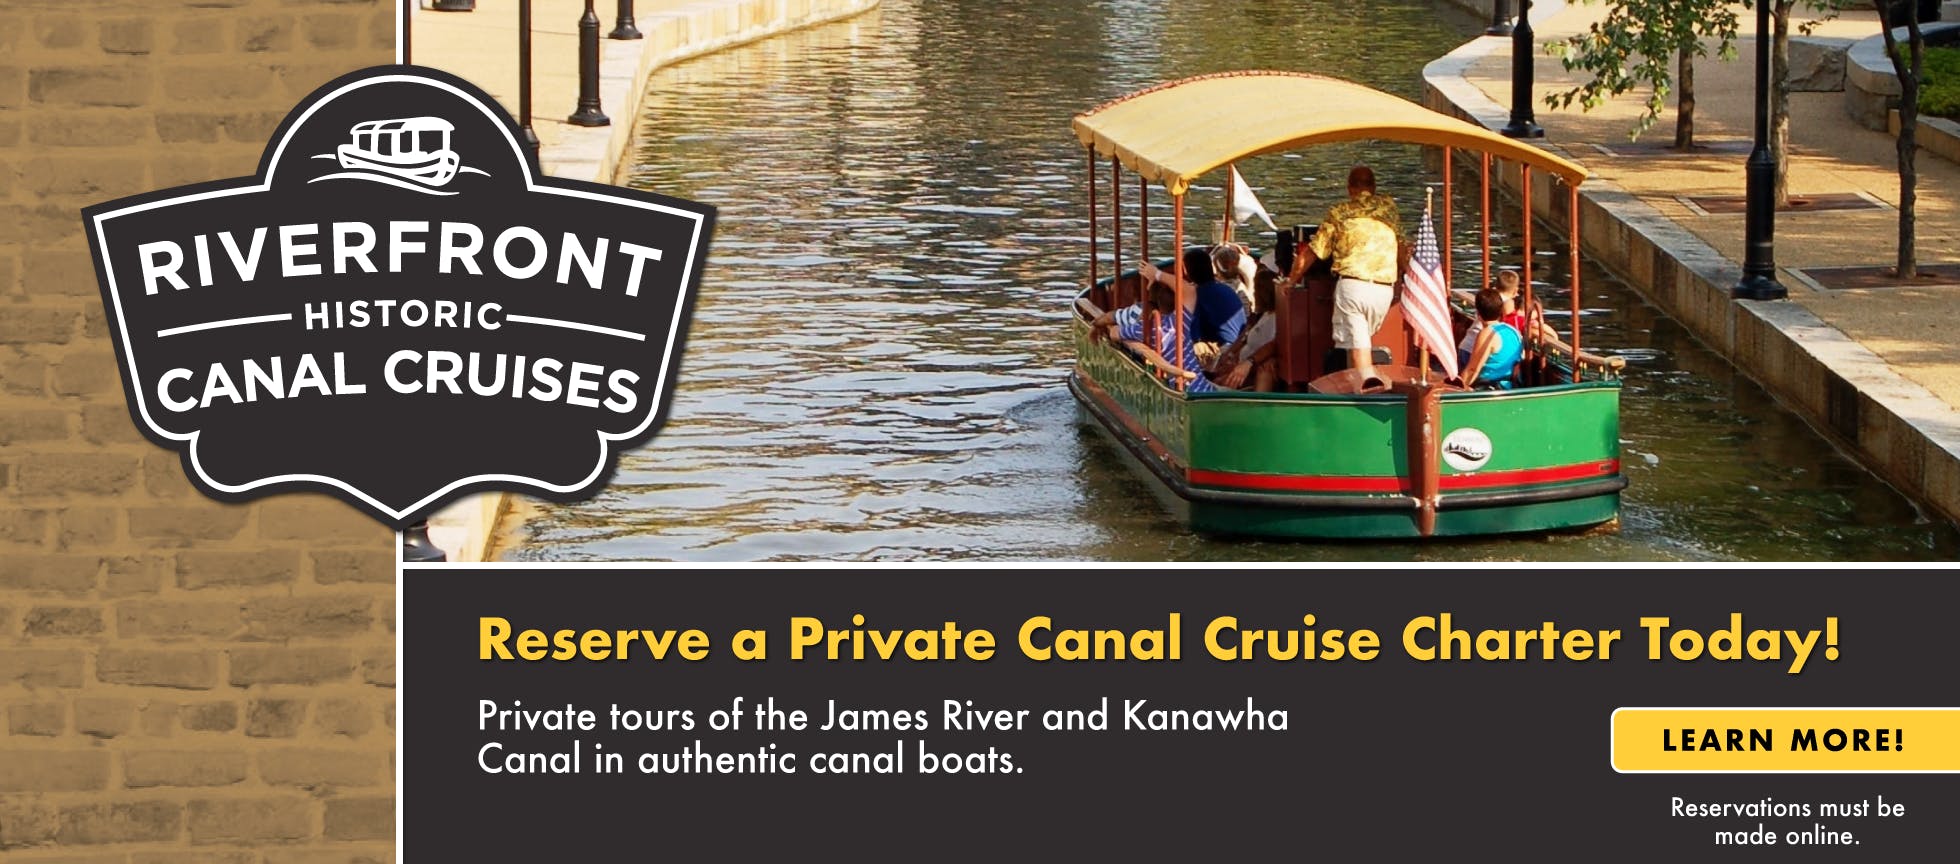 Riverfront Canal Cruises in Richmond, Virginia